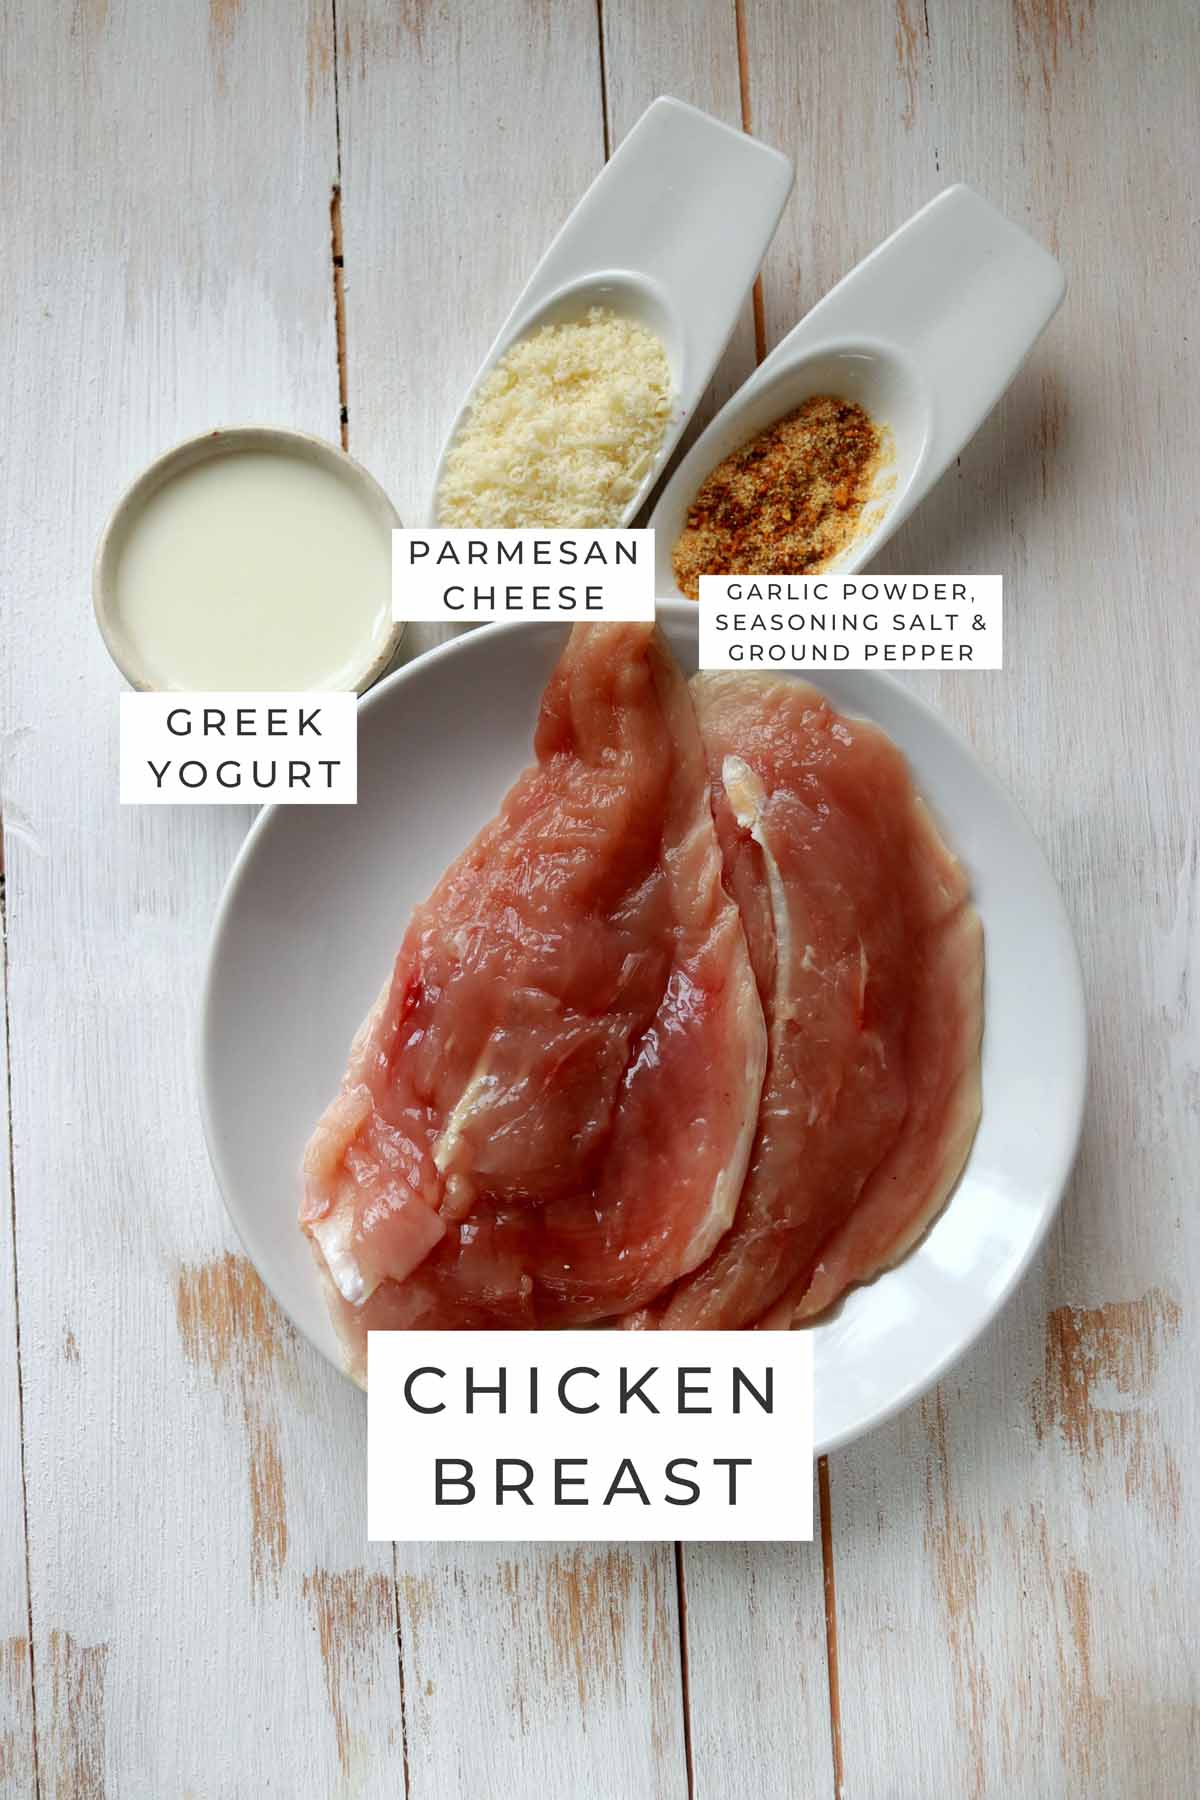 Labeled ingredients for the chicken breast.